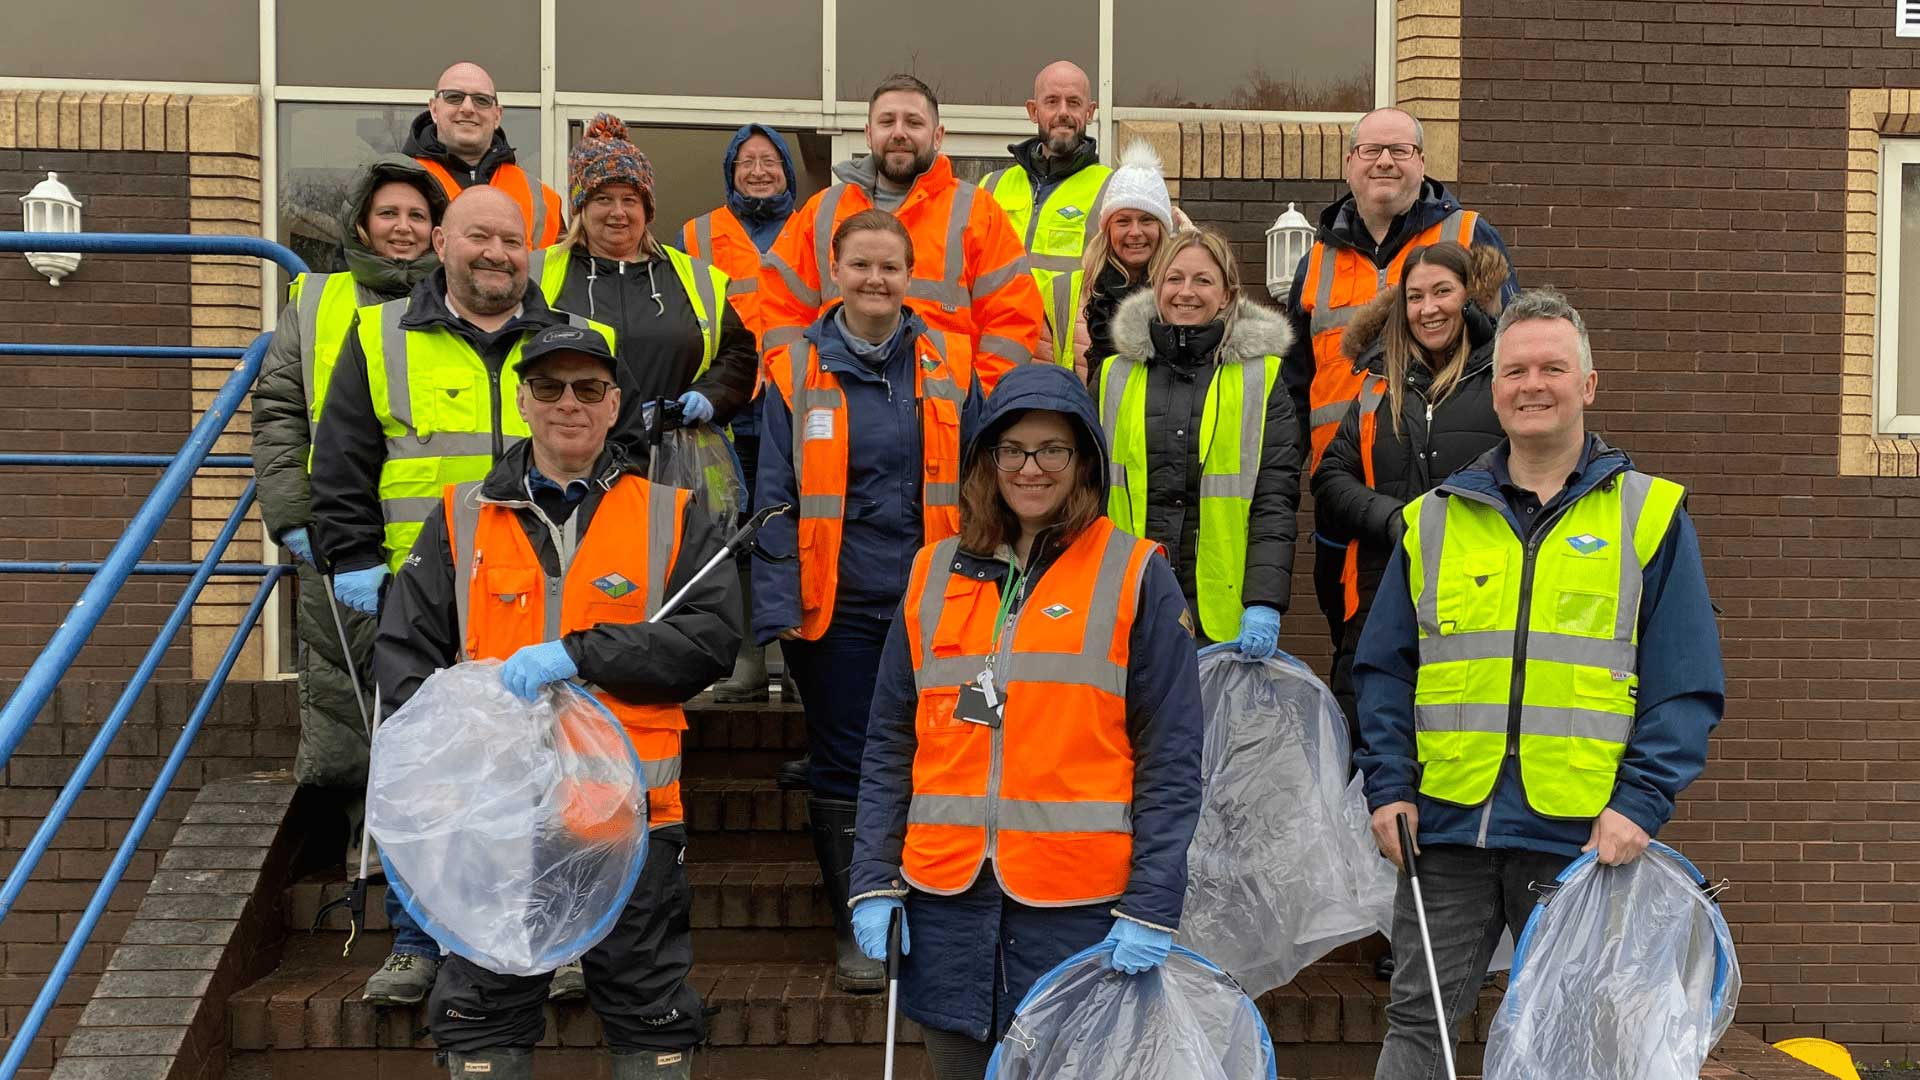 NVS takes part in the Great British Spring Clean!